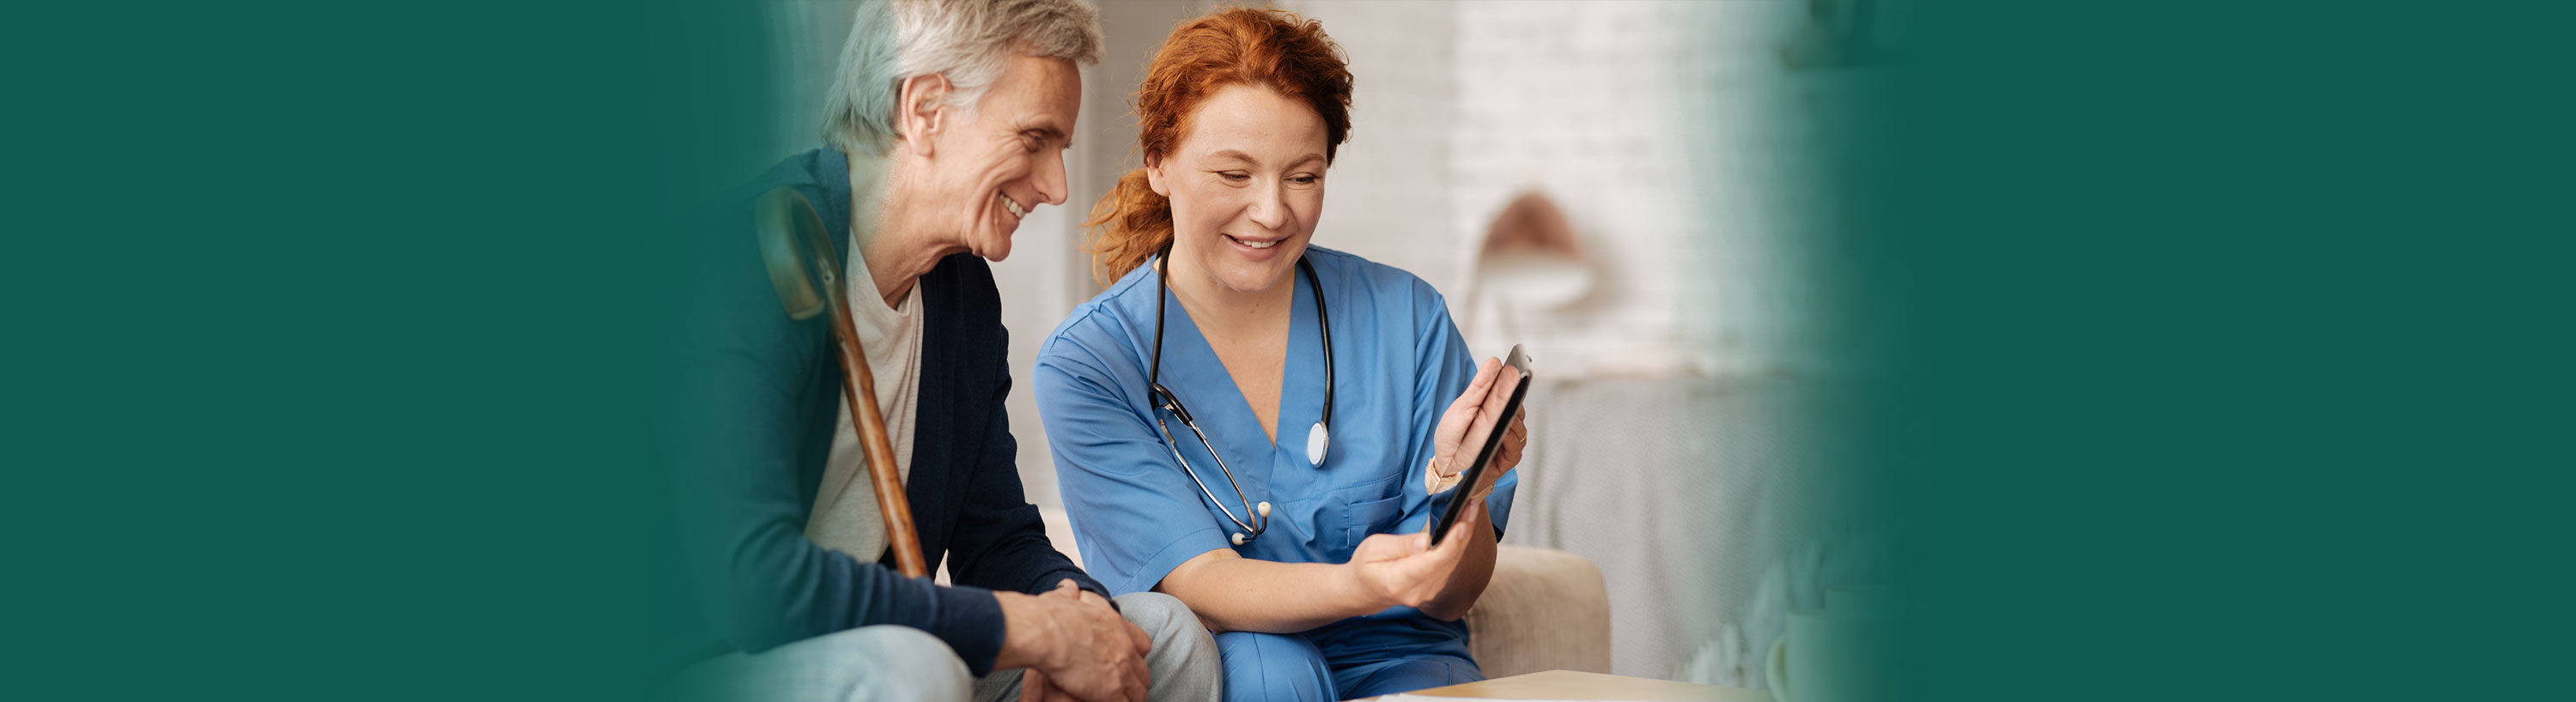 Banner picture of a female Nurse sitting down next to a male patient. They are looking down at a tablet and smiling.